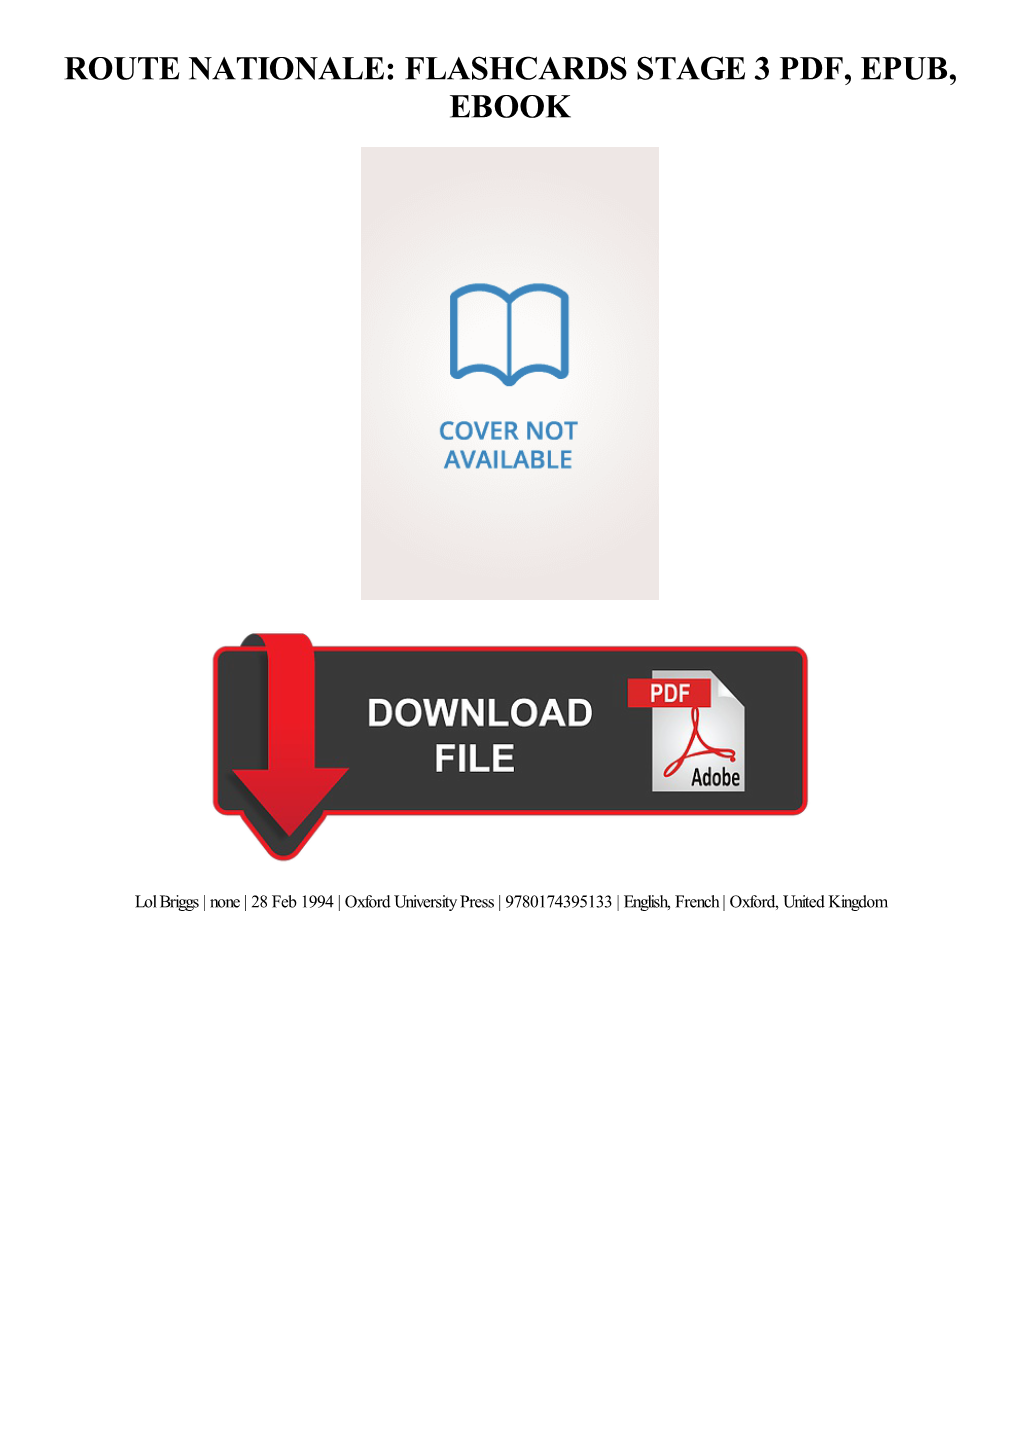 Route Nationale: Flashcards Stage 3 Pdf, Epub, Ebook